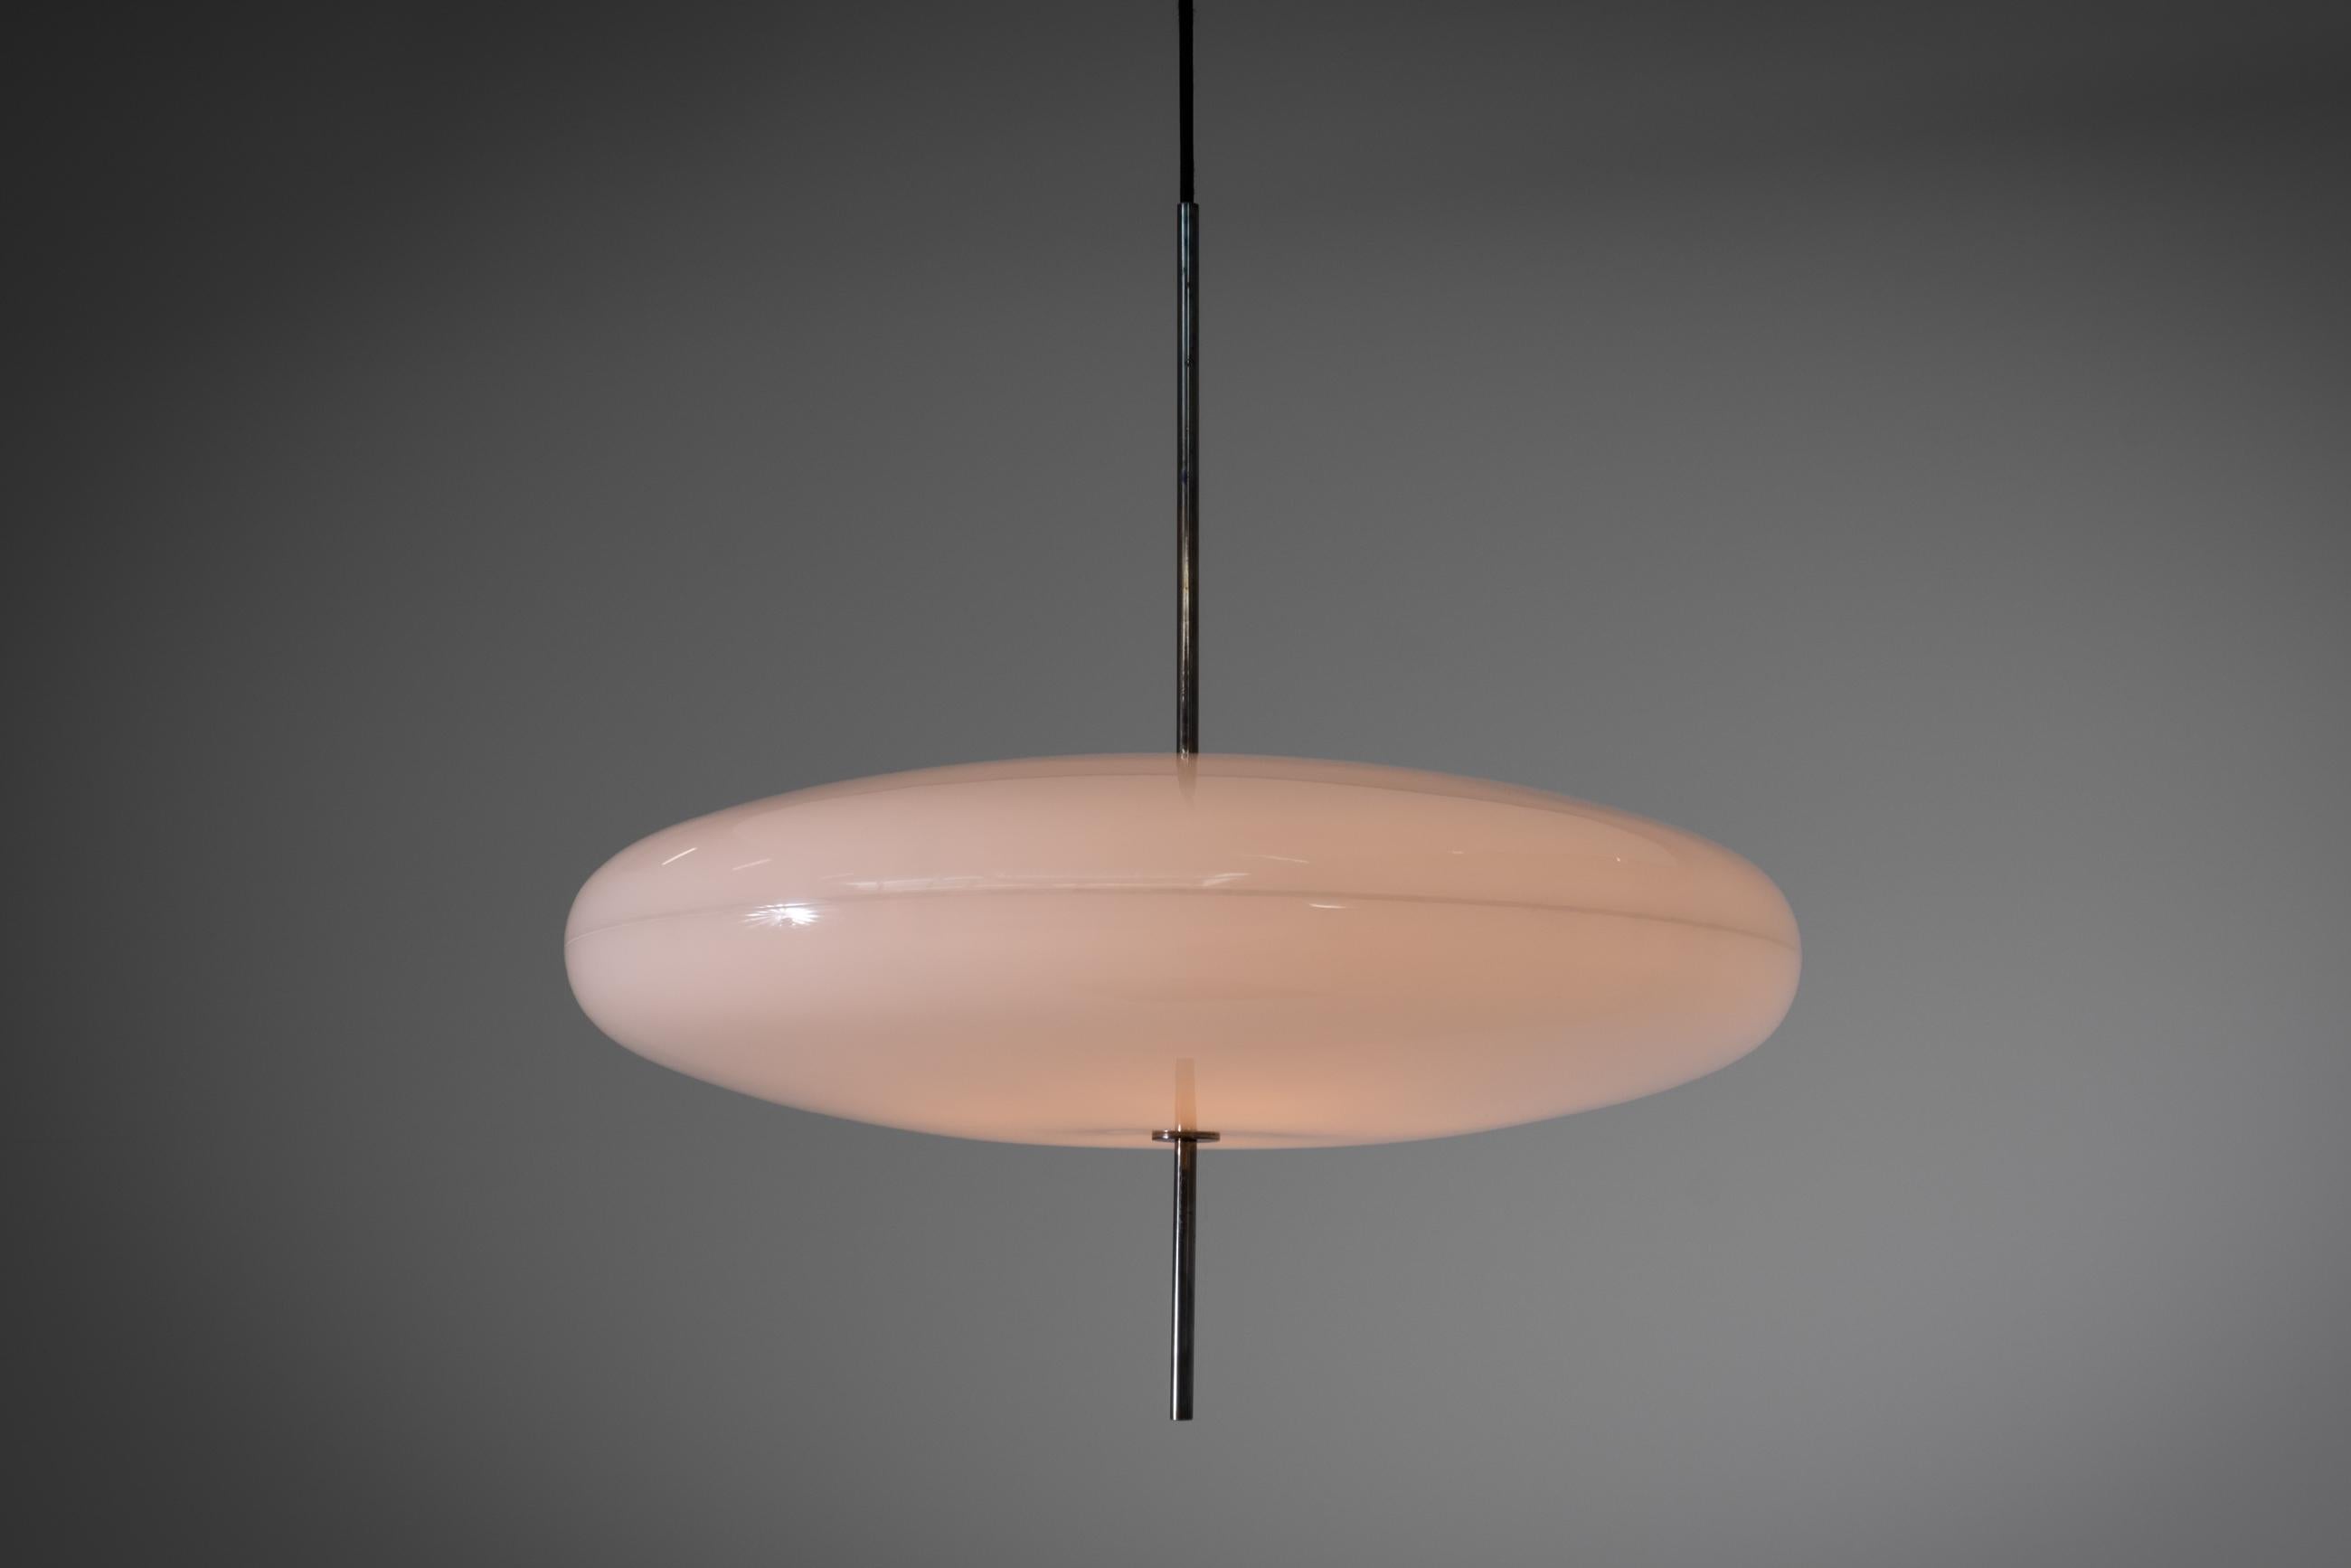 Iconic design, chandelier mod. 2065 GF by Gino Sarfatti for Arteluce, Italy 1952. This is the original edition Arteluce, so not a later remake. The lamp is made of two acrylic glass shells held together by a refined blackened brass tube system.